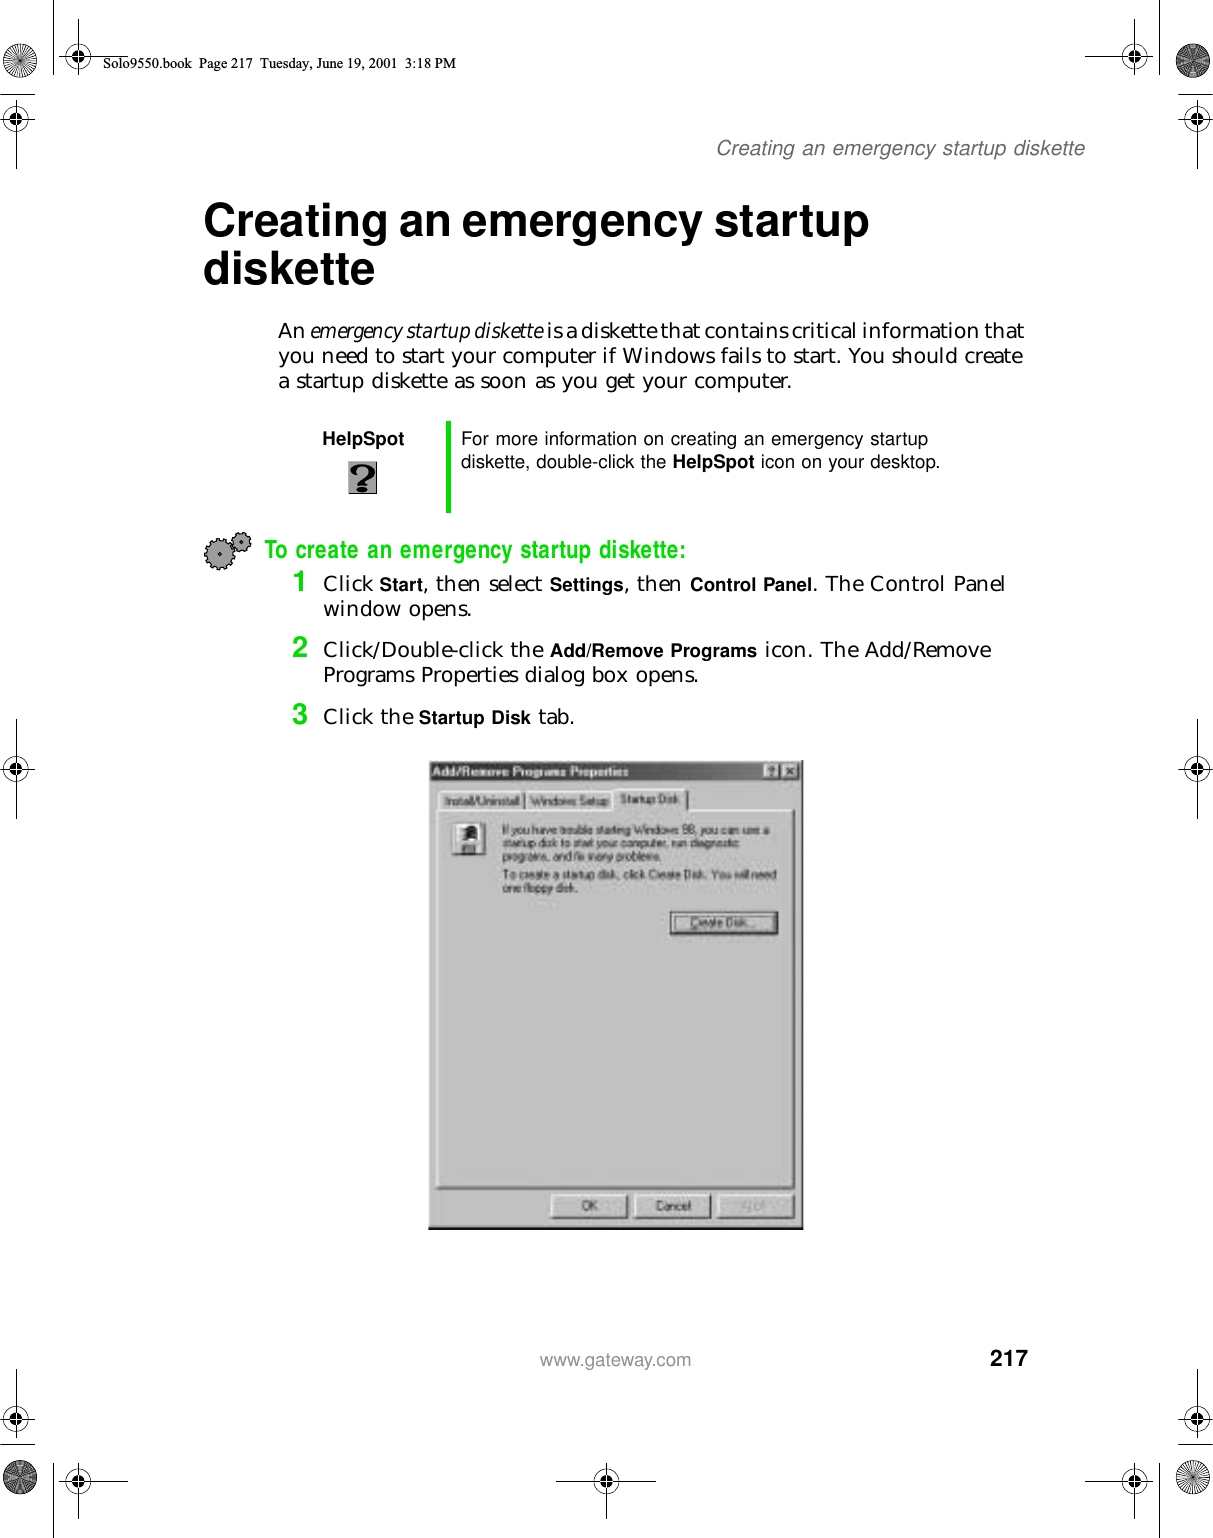 217Creating an emergency startup diskettewww.gateway.comCreating an emergency startup disketteAn emergency startup diskette is a diskette that contains critical information that you need to start your computer if Windows fails to start. You should create a startup diskette as soon as you get your computer.To create an emergency startup diskette:1Click Start, then select Settings, then Control Panel. The Control Panel window opens.2Click/Double-click the Add/Remove Programs icon. The Add/Remove Programs Properties dialog box opens.3Click the Startup Disk tab.HelpSpot For more information on creating an emergency startup diskette, double-click the HelpSpot icon on your desktop.Solo9550.book Page 217 Tuesday, June 19, 2001 3:18 PM